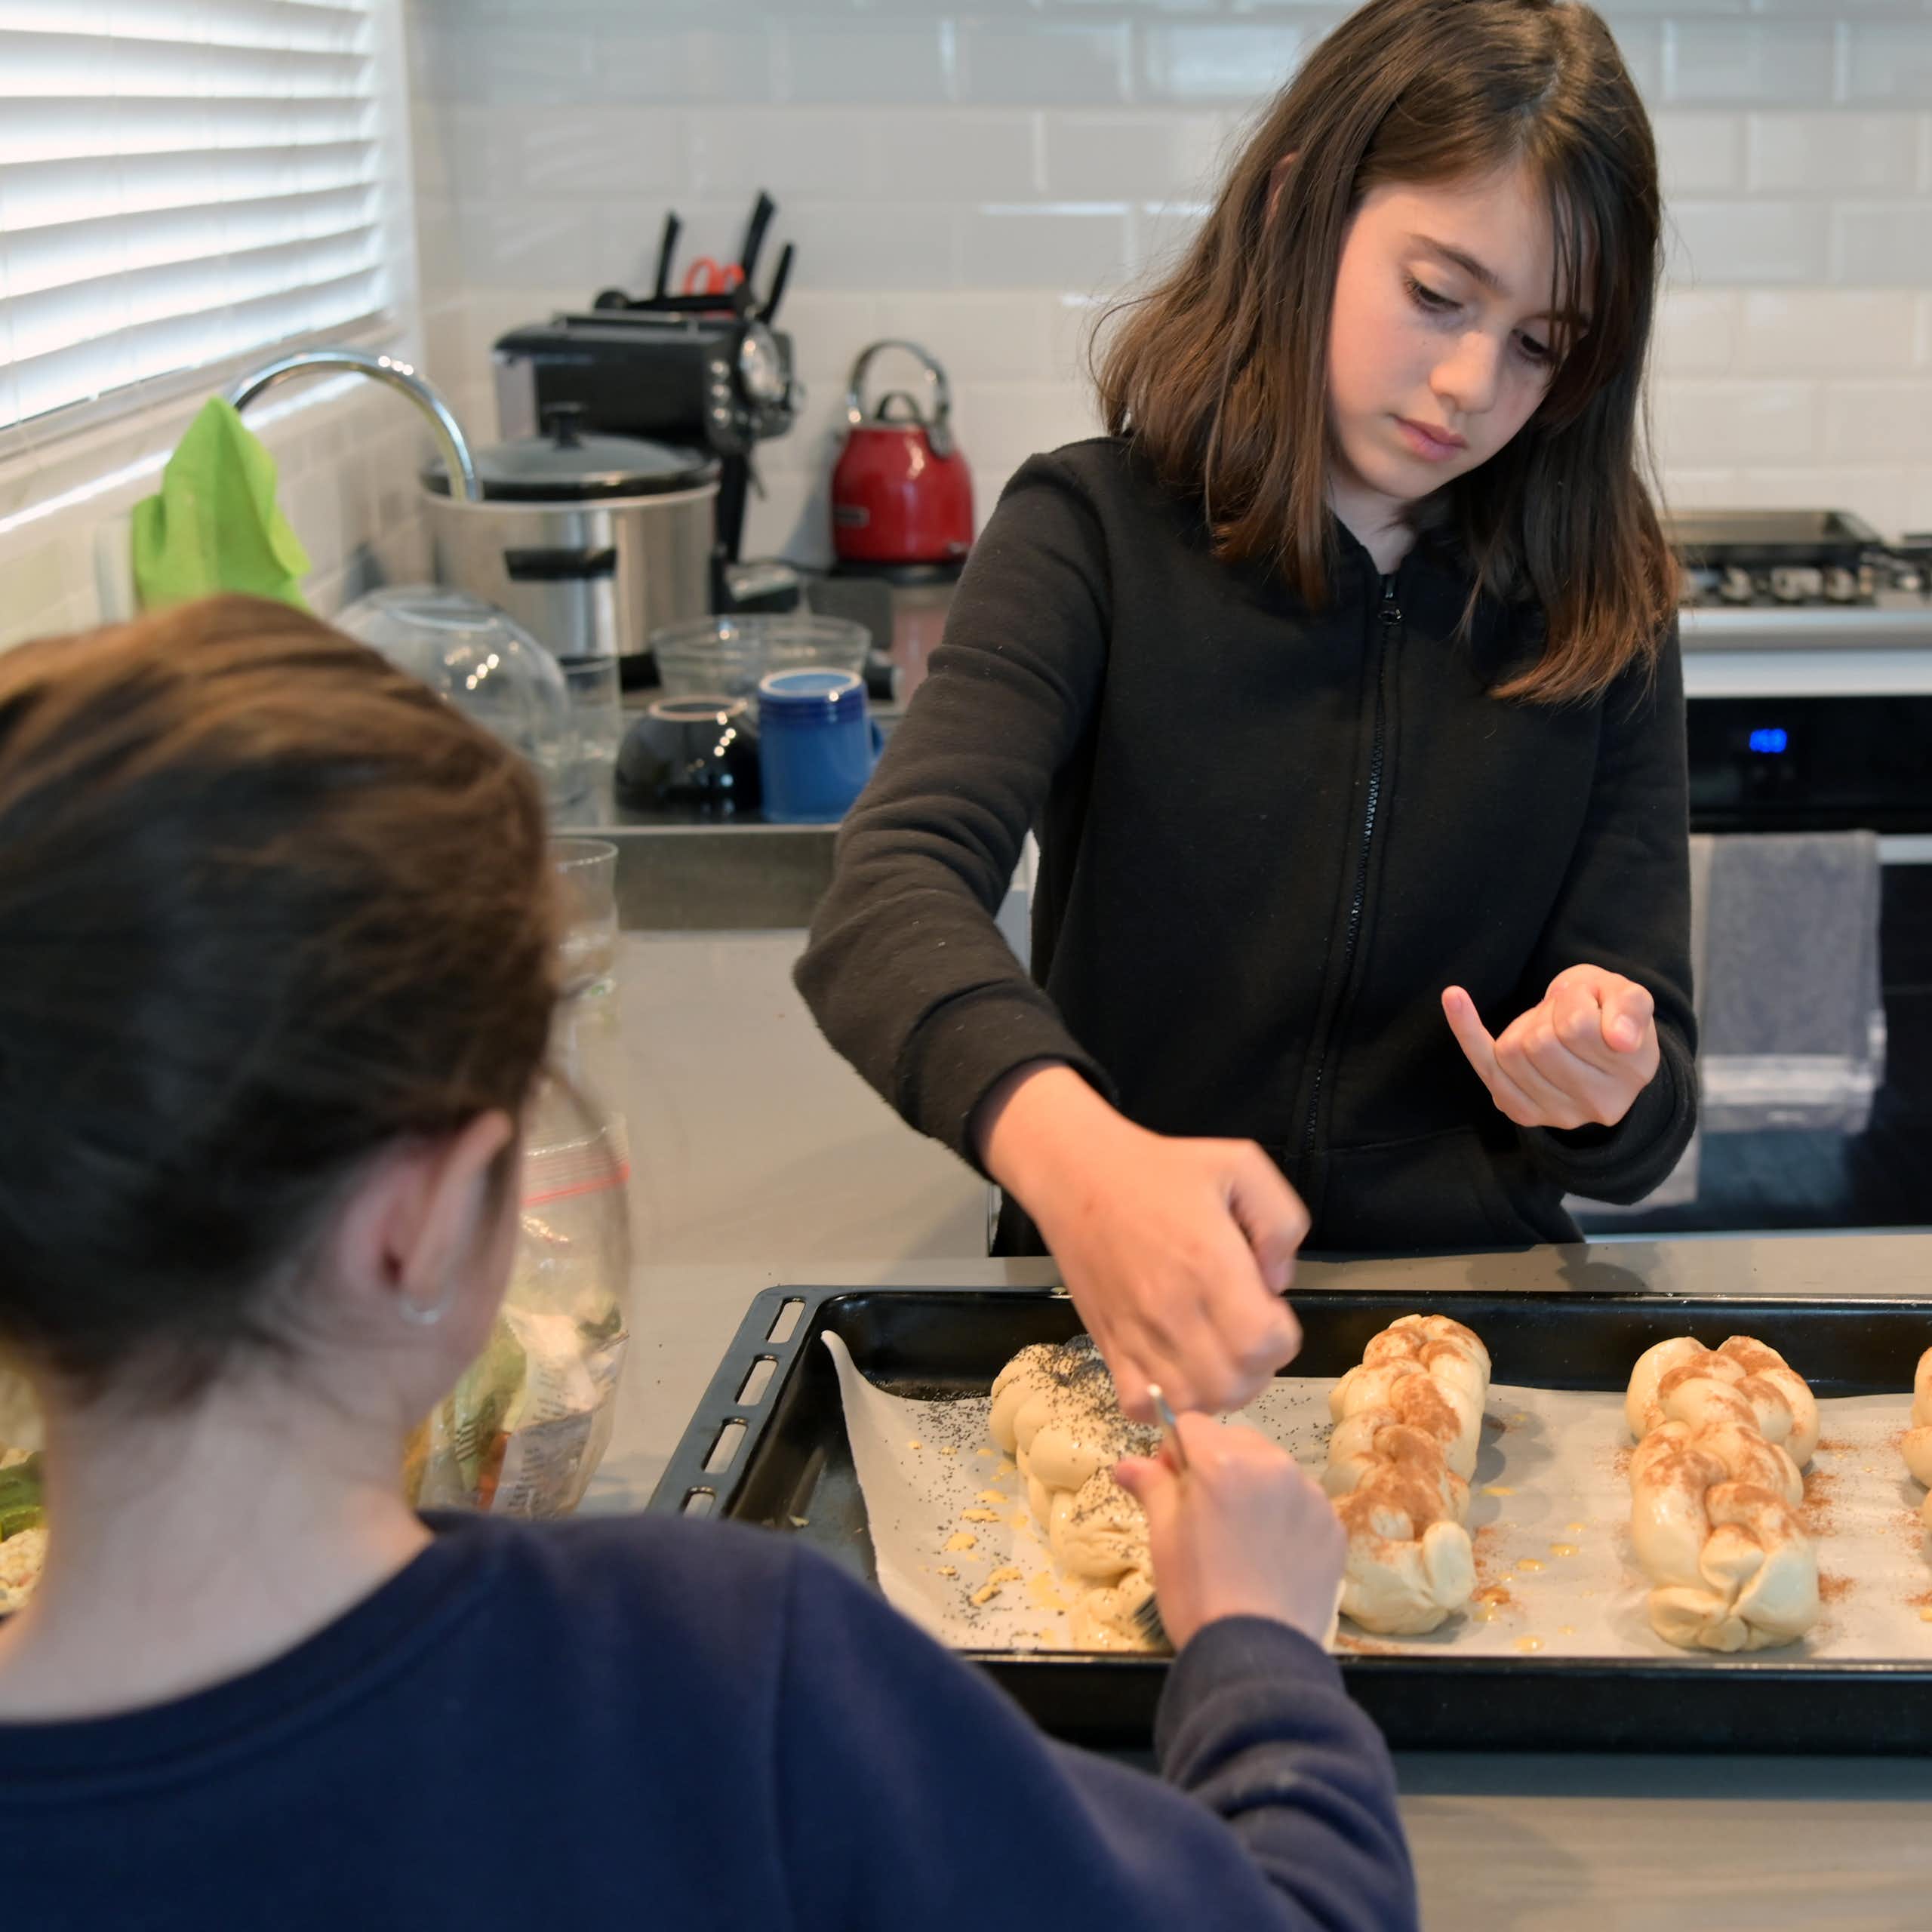 Two young Jewish girls baking challah bread.